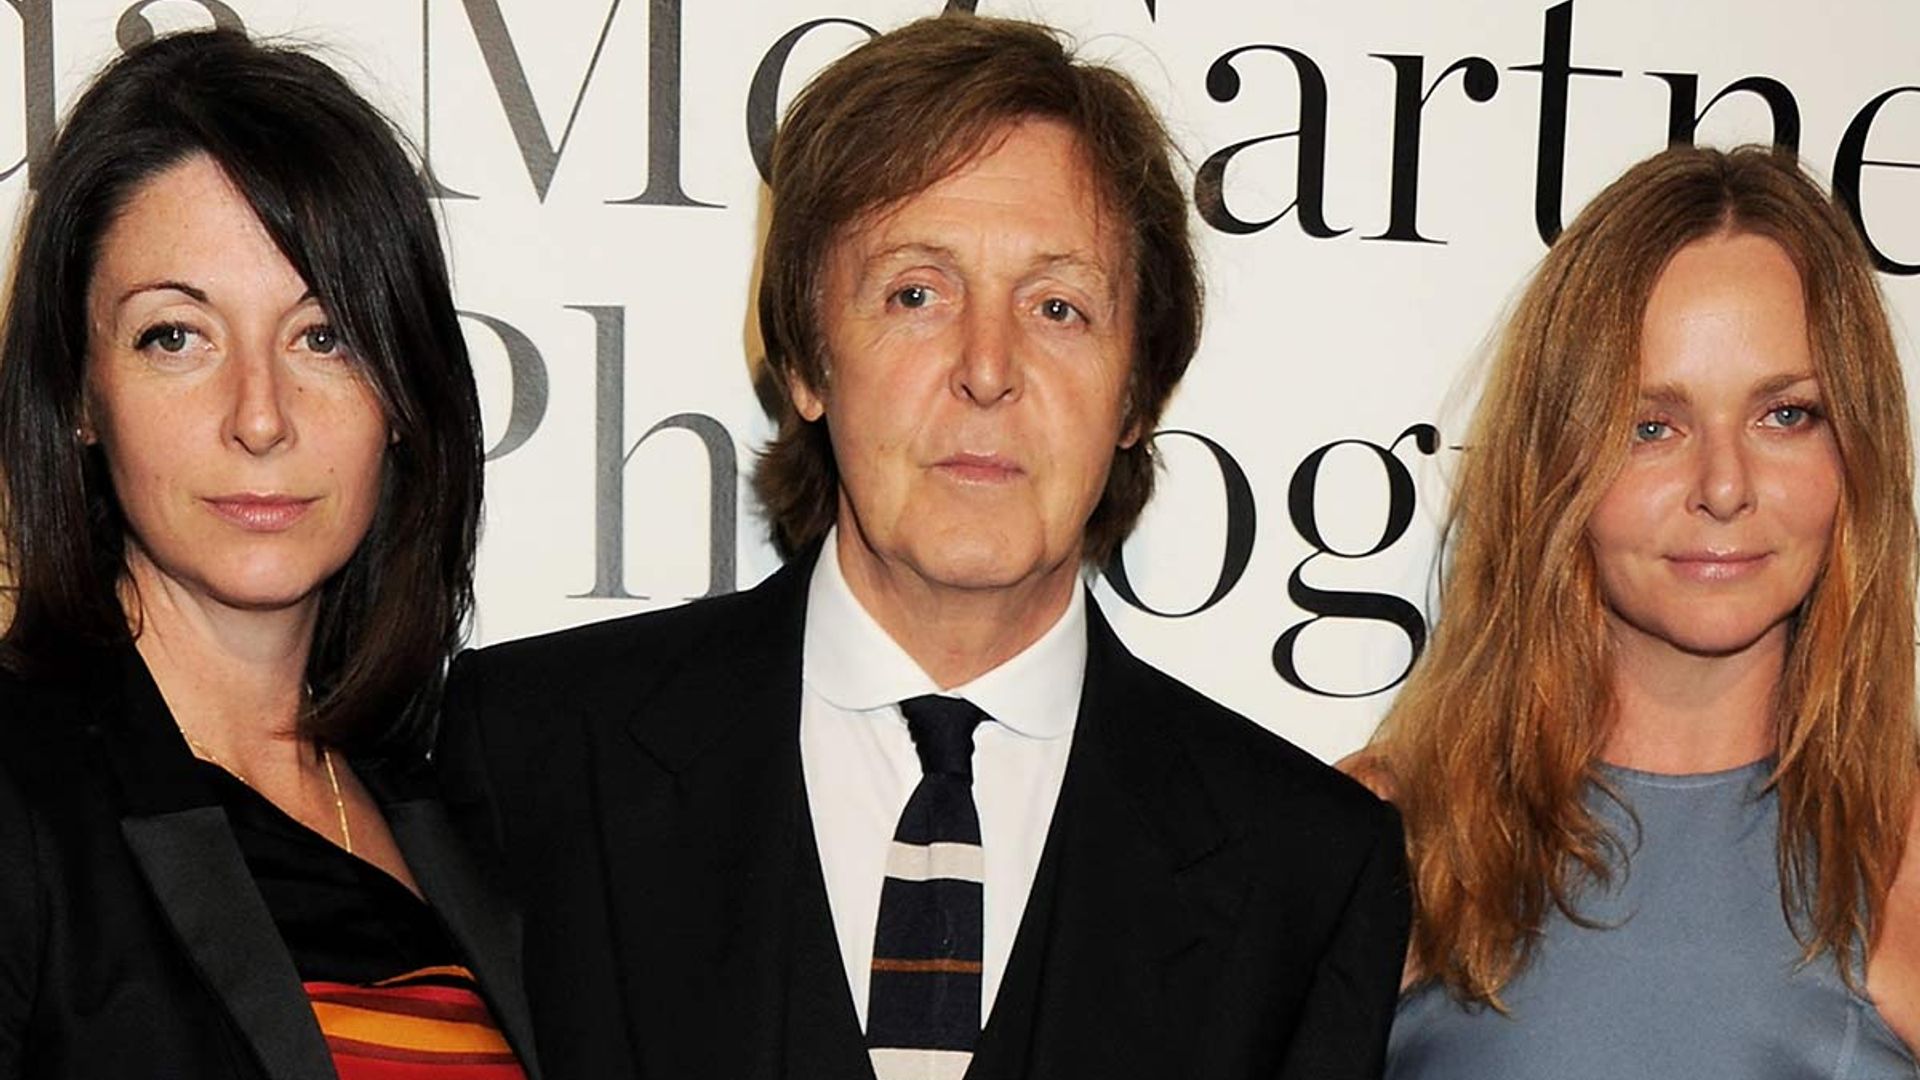 Paul McCartney serenaded by daughters in rare family footage